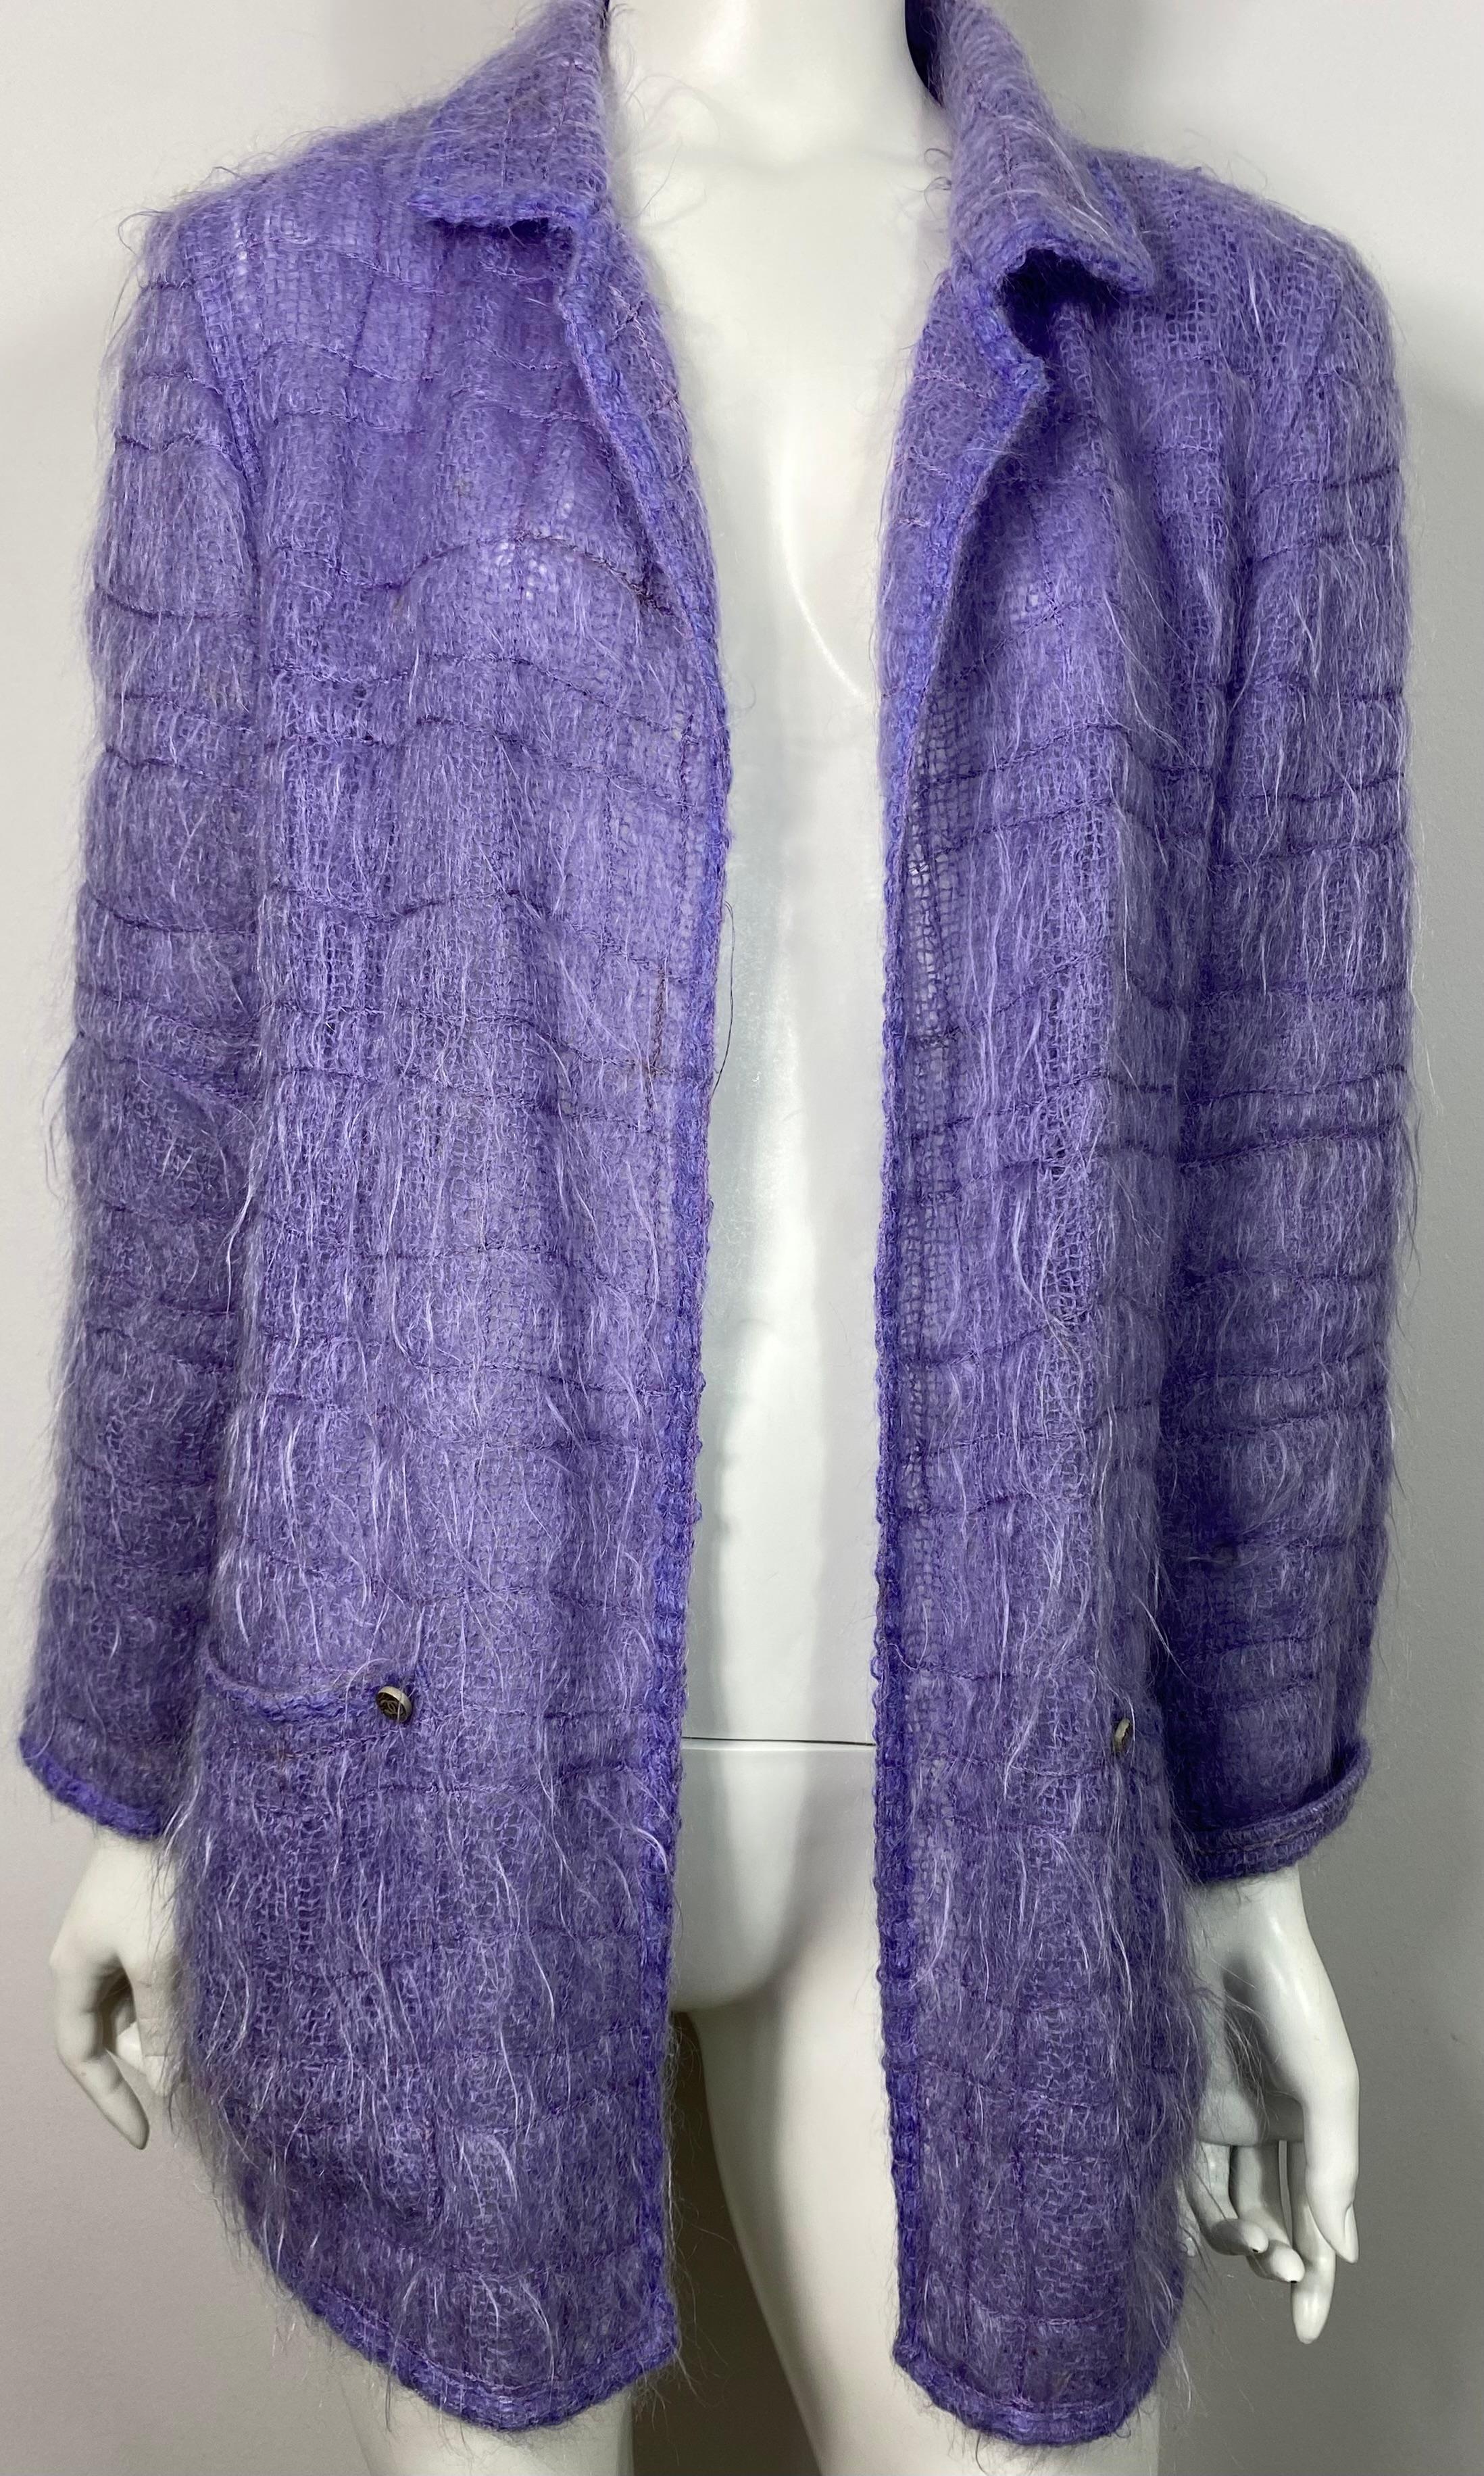 Chanel Runway Fall 1998 Lavender Mohair Jacket - Size 36. This Karl Lagerfeld 1990’s Runway piece was part of the Fall 1998 Collection. The jacket is very lightweight and made of a lavender Mohair (62%) and Wool (38%) blend fabric. The unlined